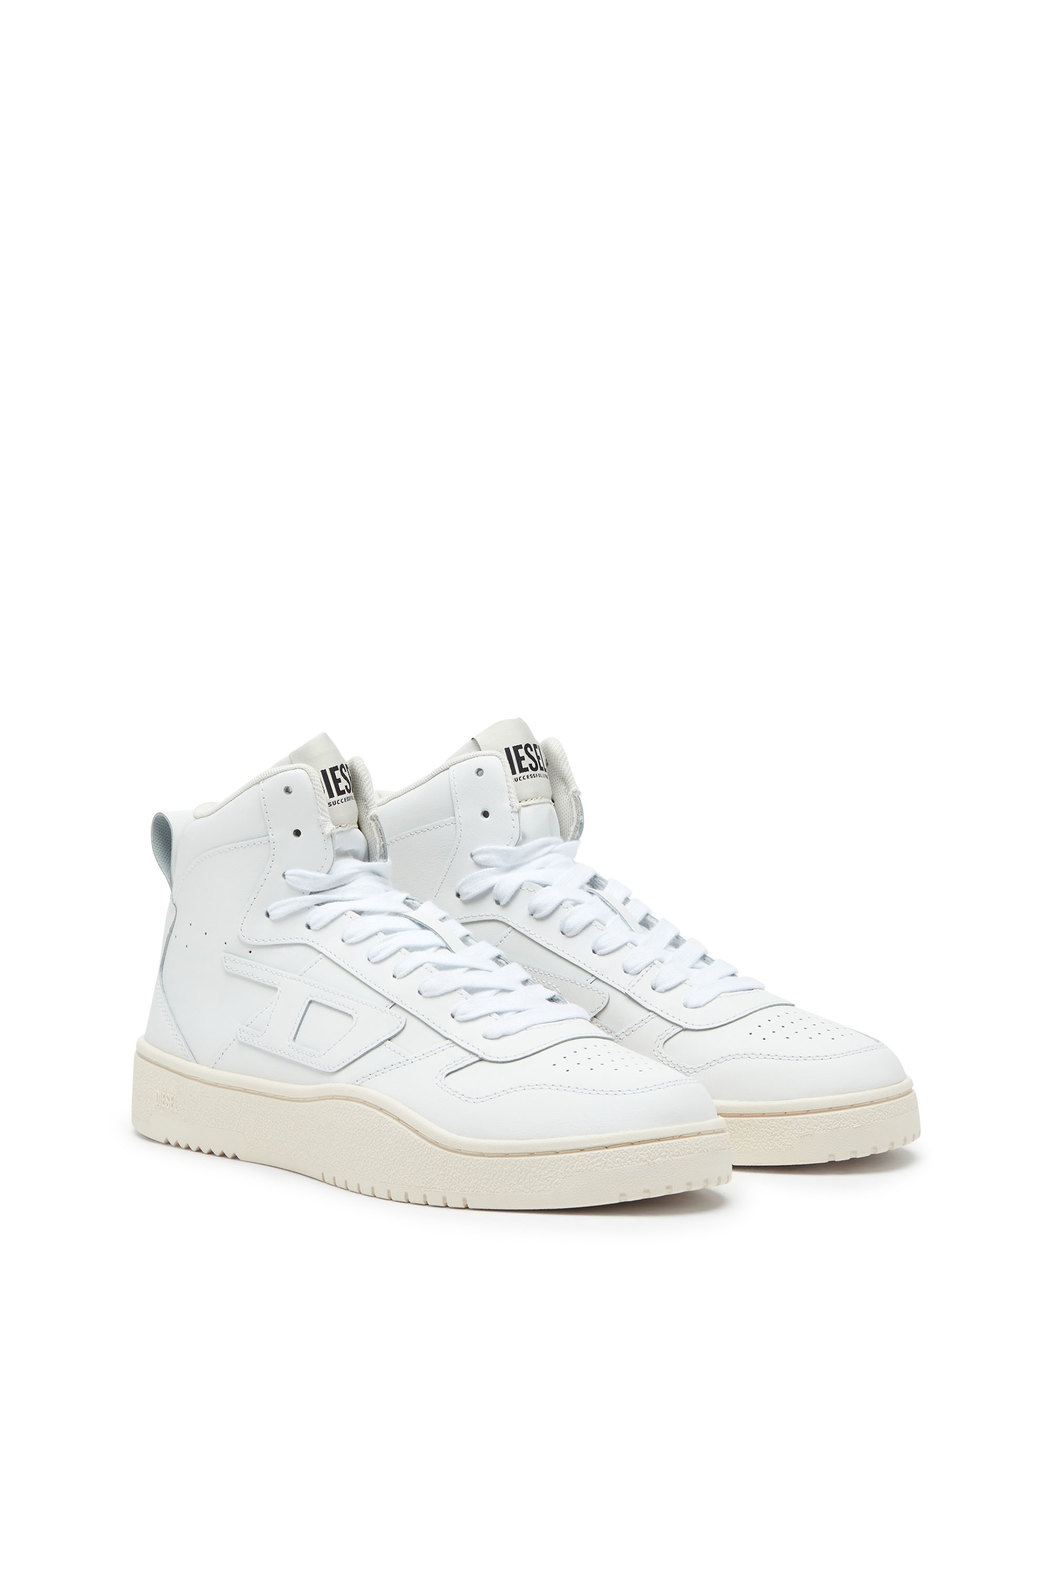 S-Ukiyo V2 Mid - High-top sneakers in leather and nylon